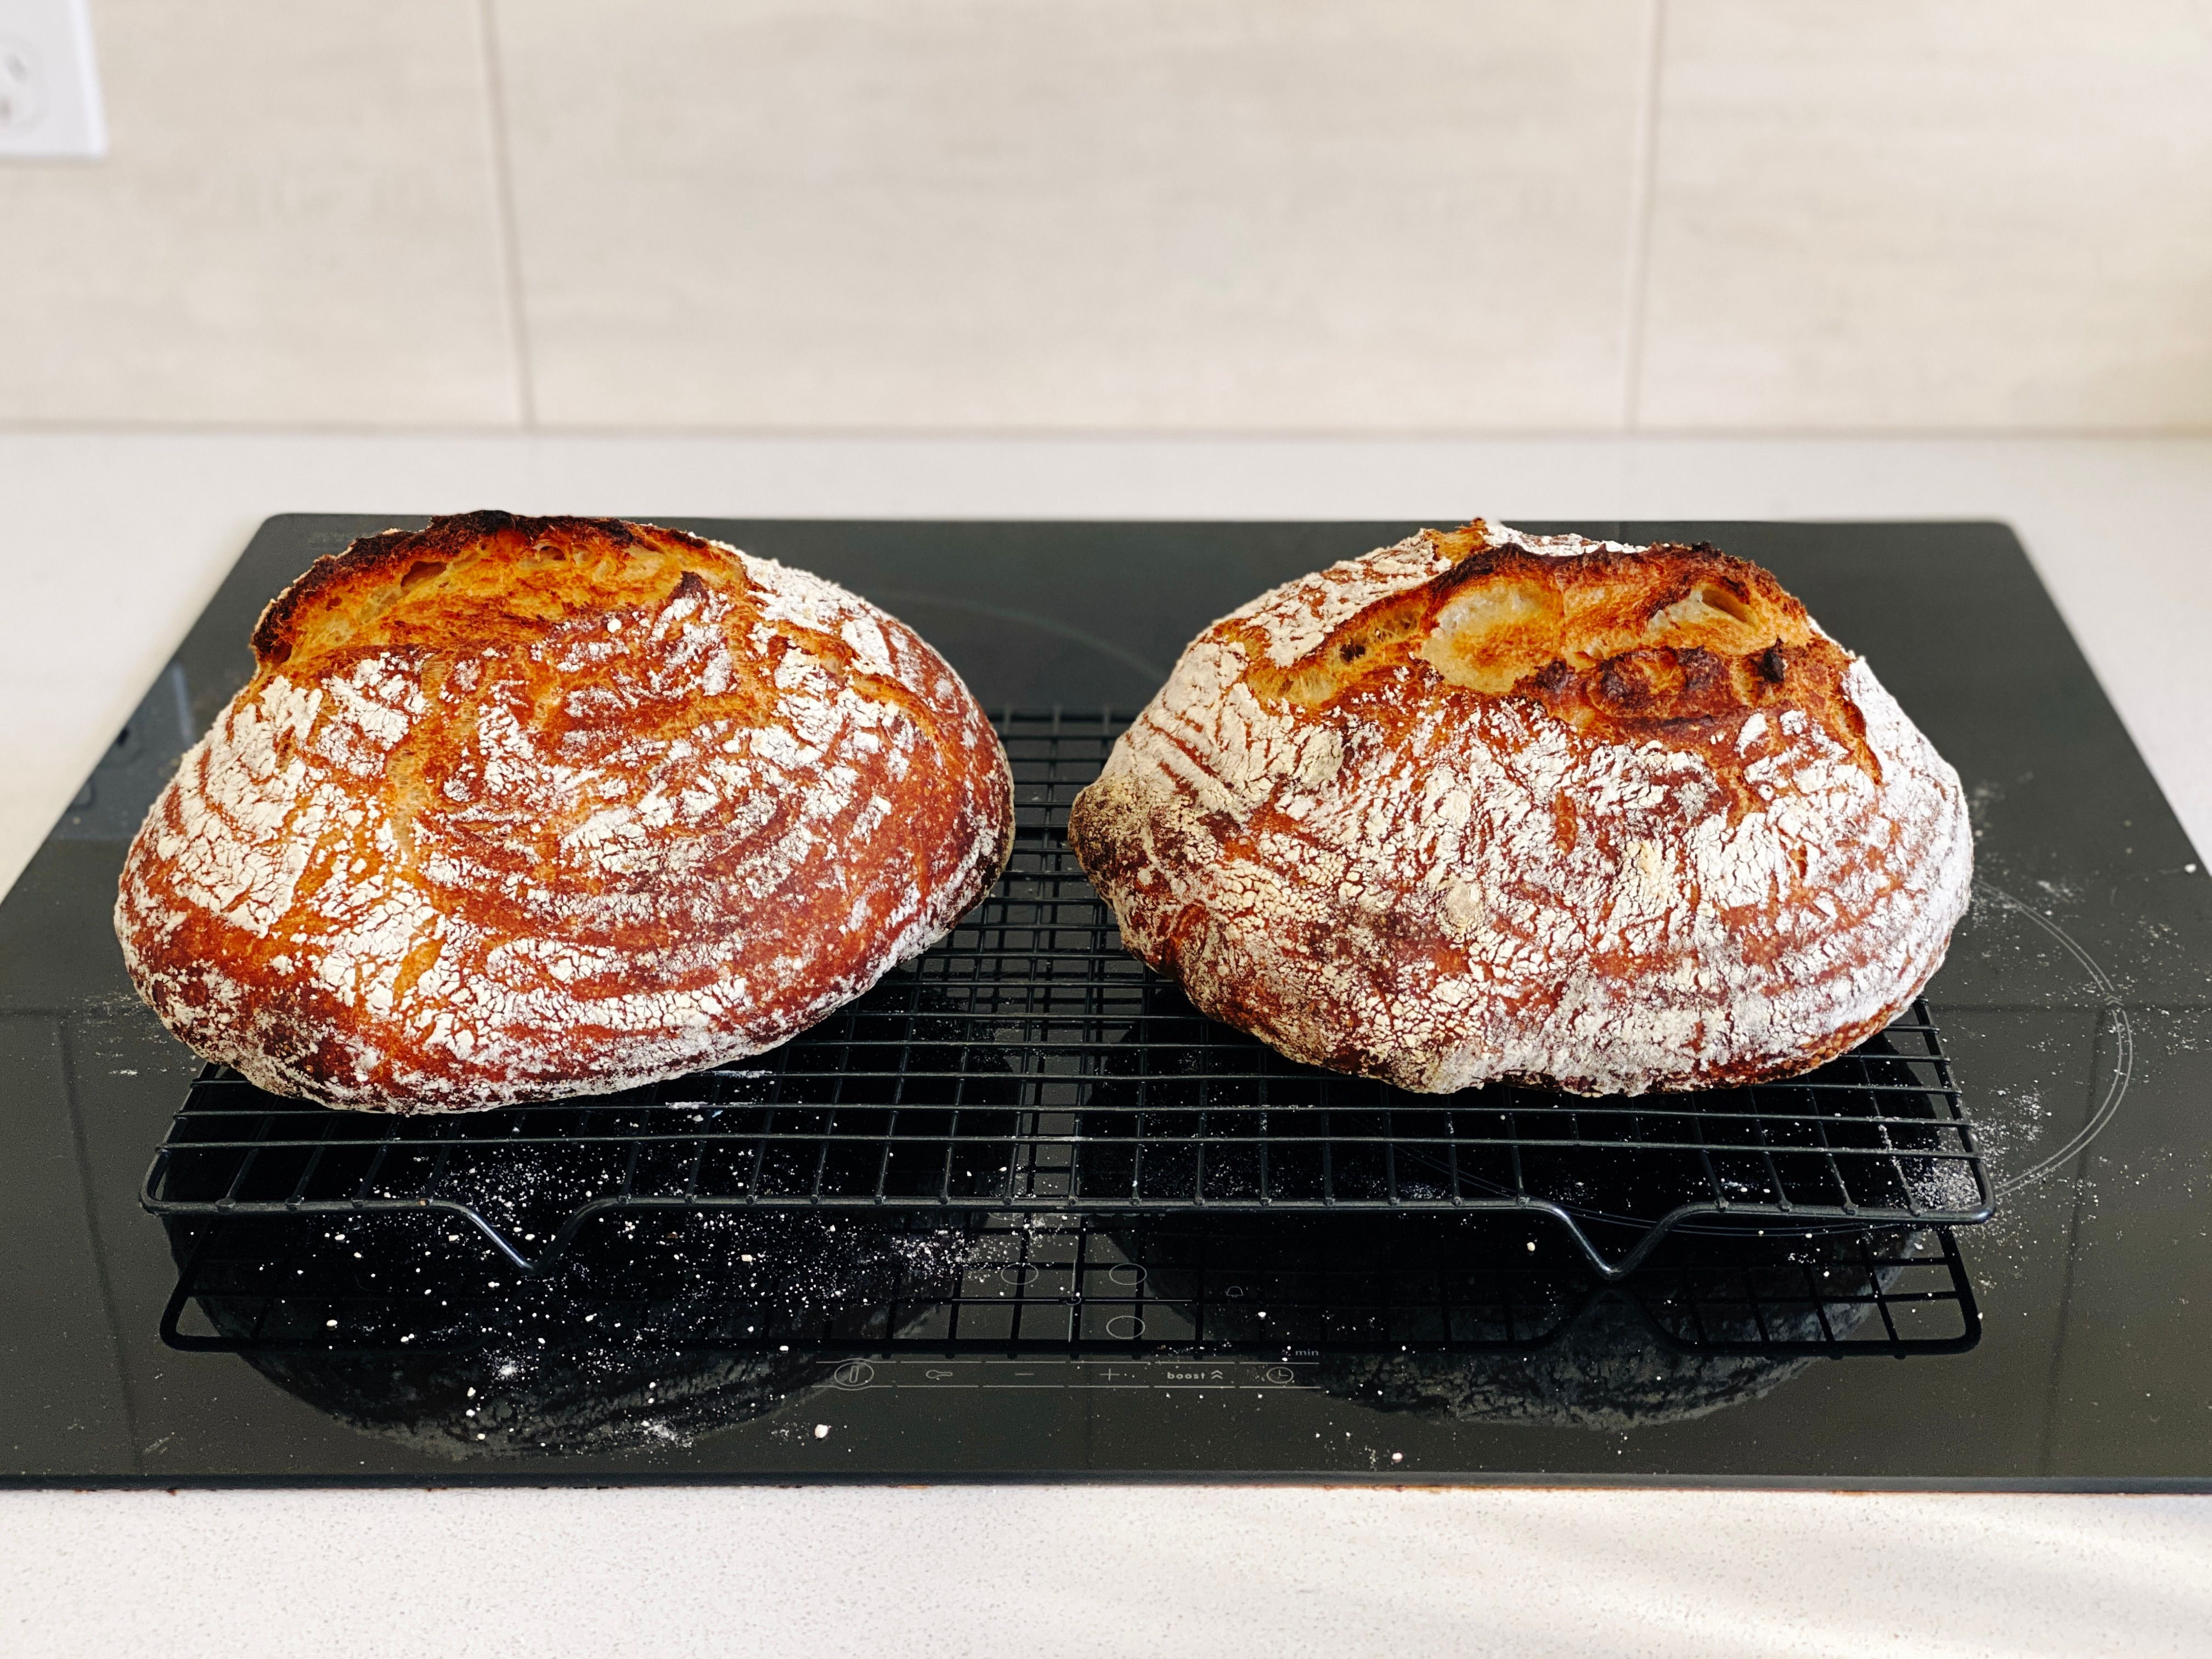 A photo of two golden brown loaves of bread covered in flour, with wonderful-looking splits on top, sitting on a cooling rack.